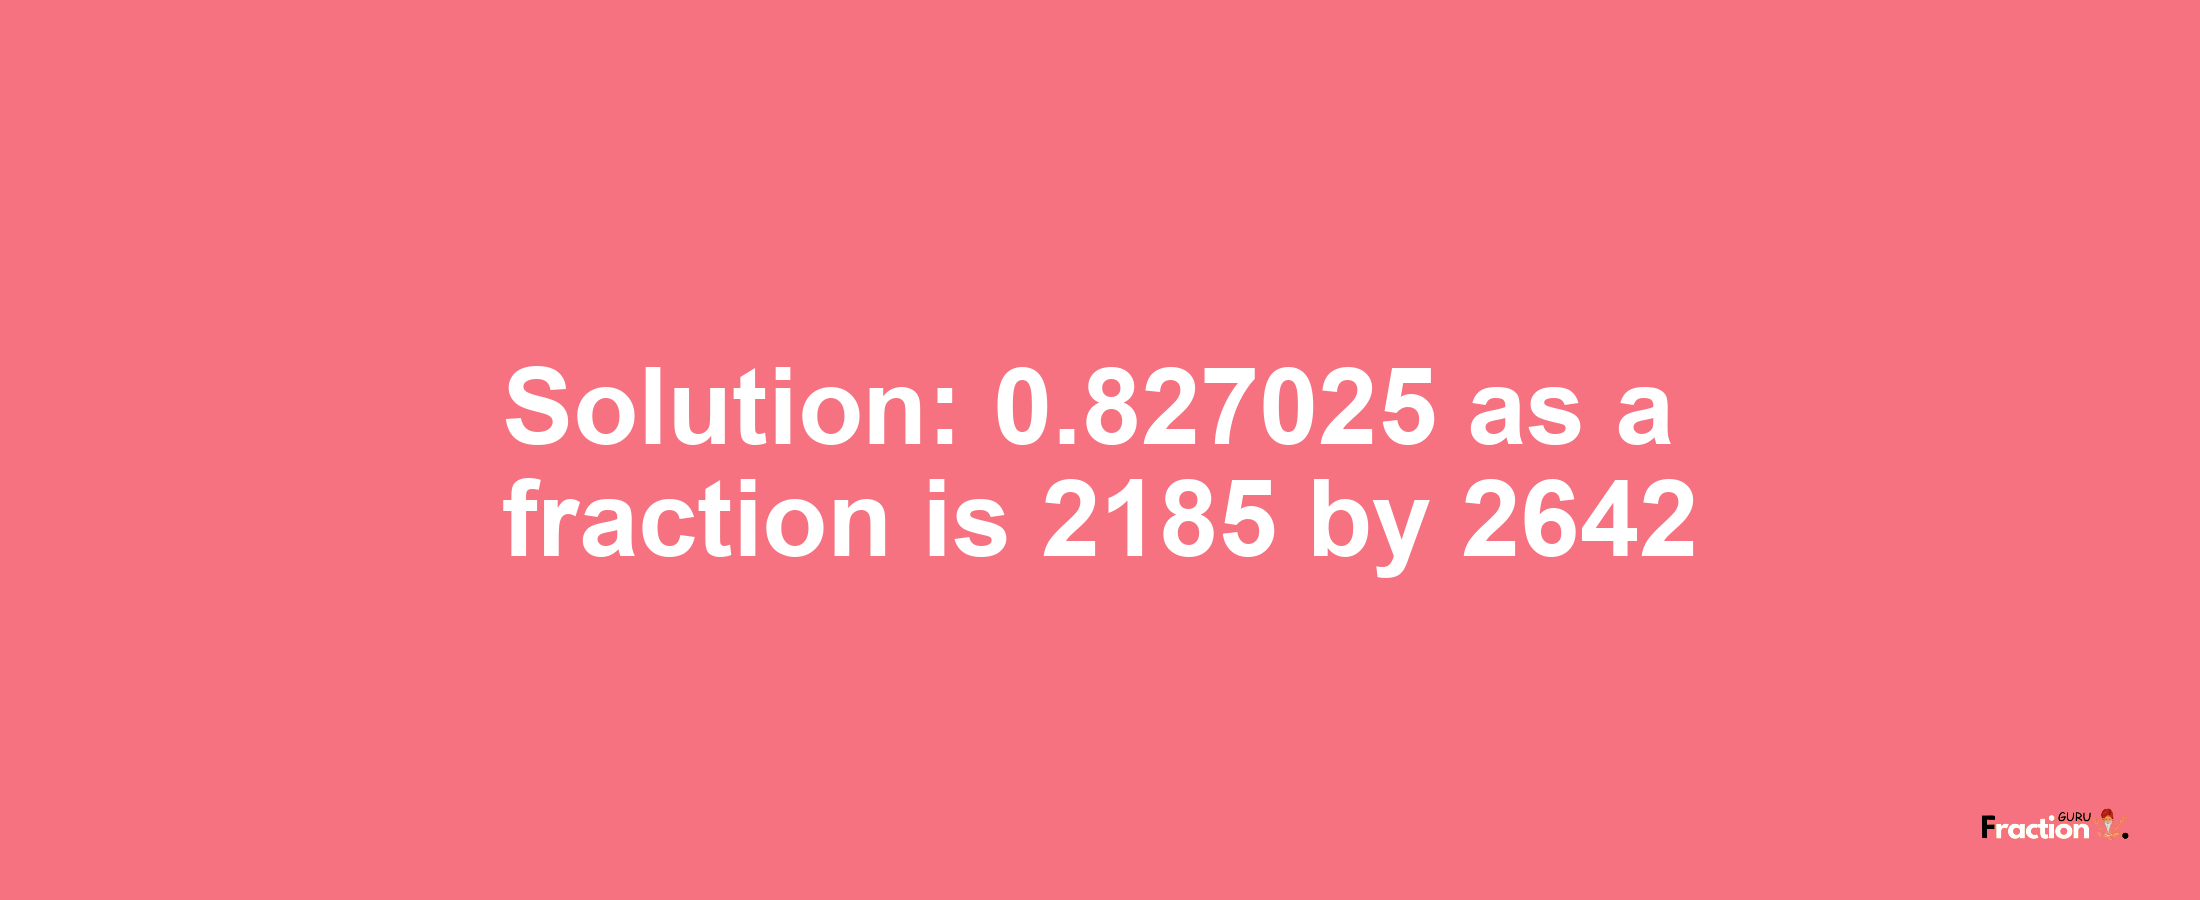 Solution:0.827025 as a fraction is 2185/2642